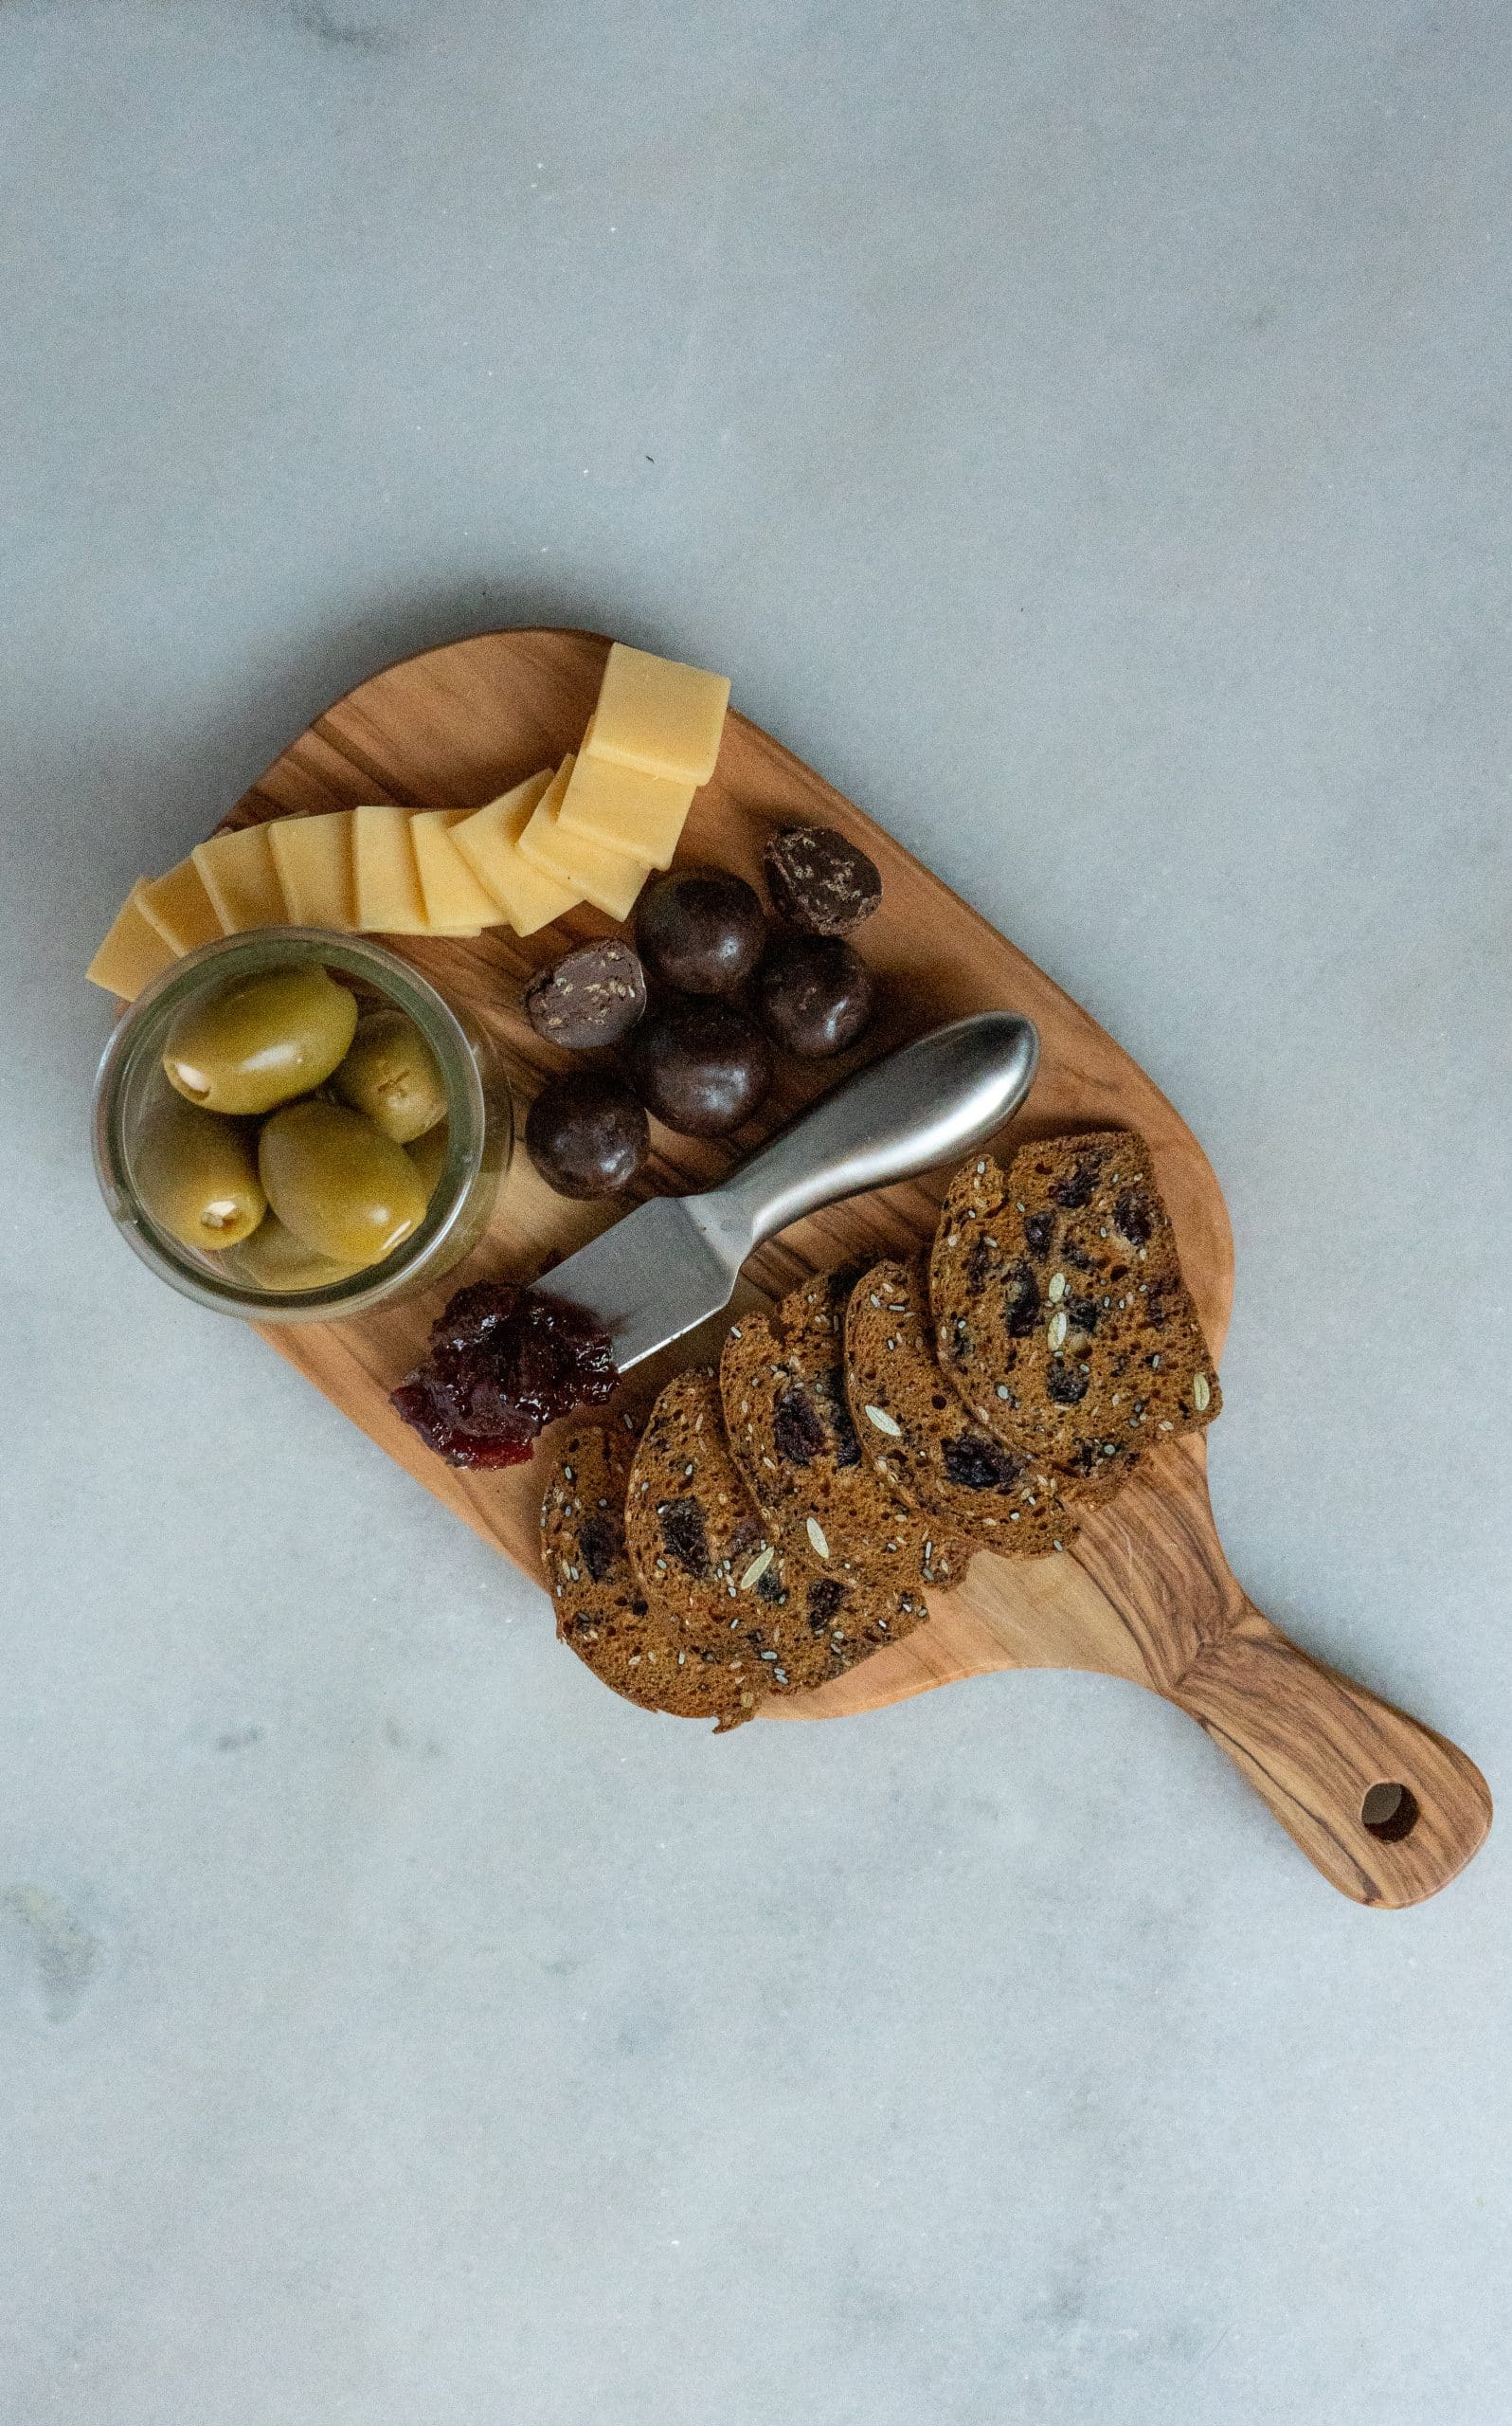 Small charcuterie board with olives, cheese, fig crackers, spiced cherry jam and chocolates